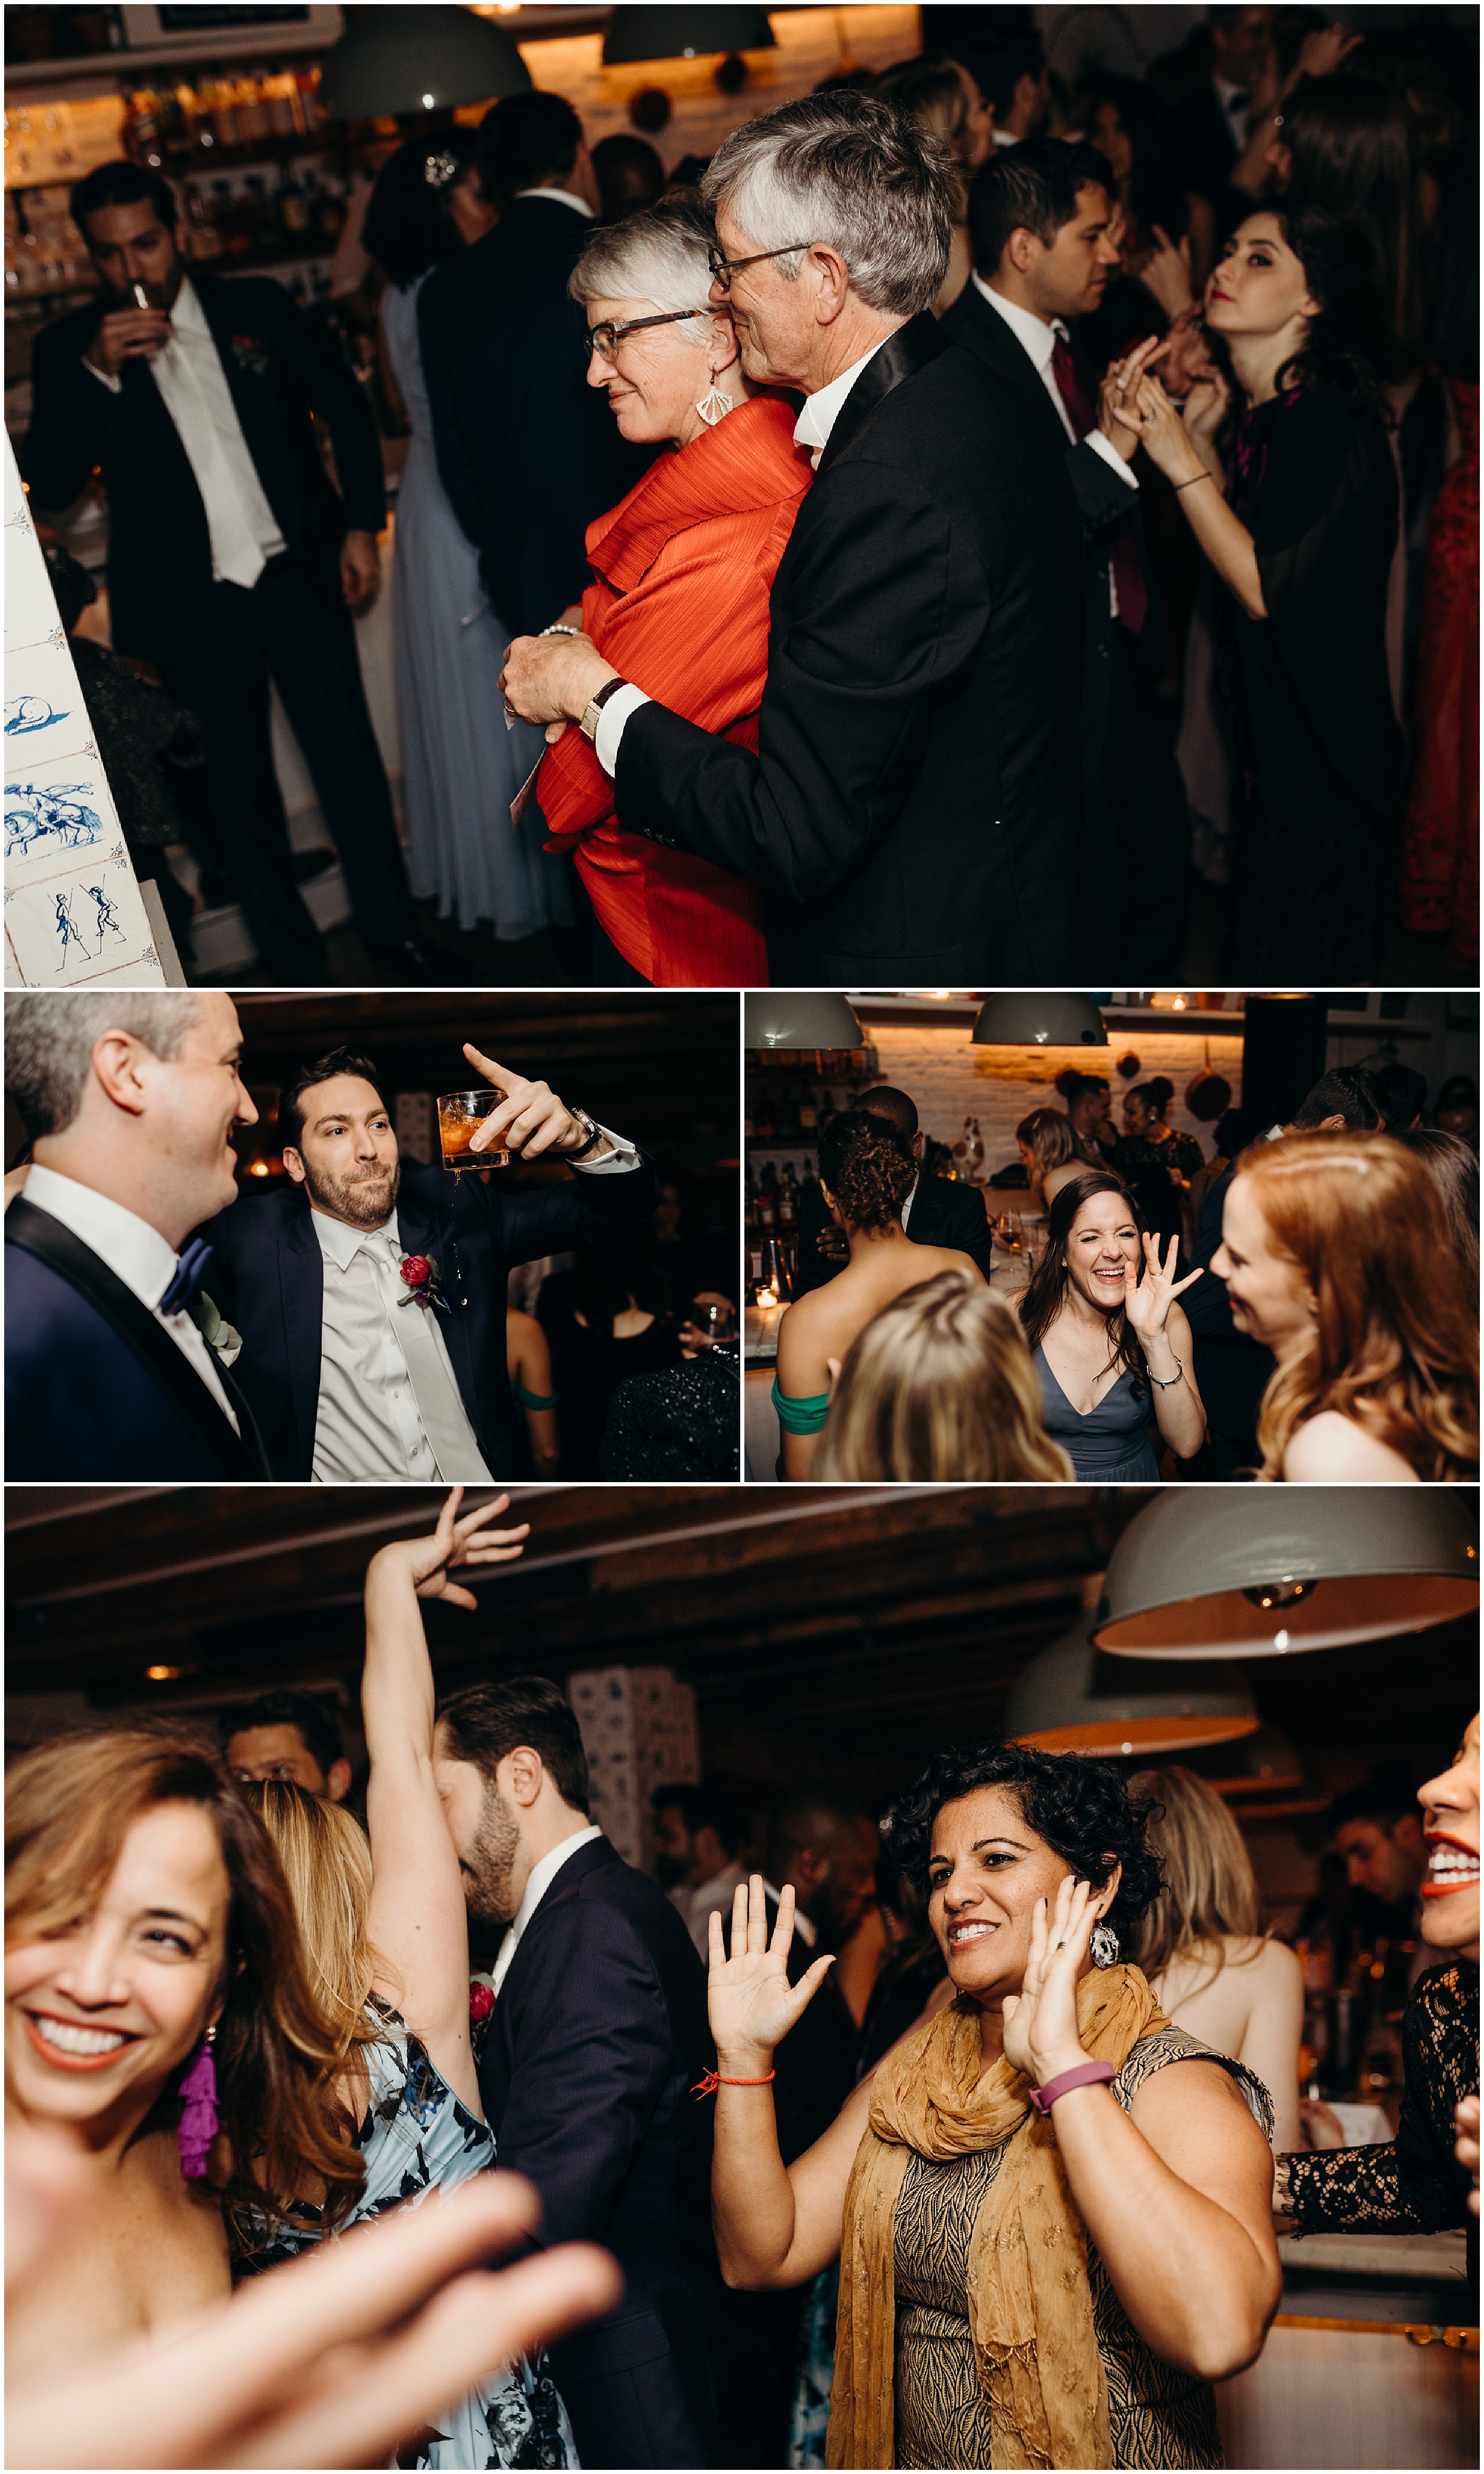 guests dance at a wedding at bobo in the west village, new york city